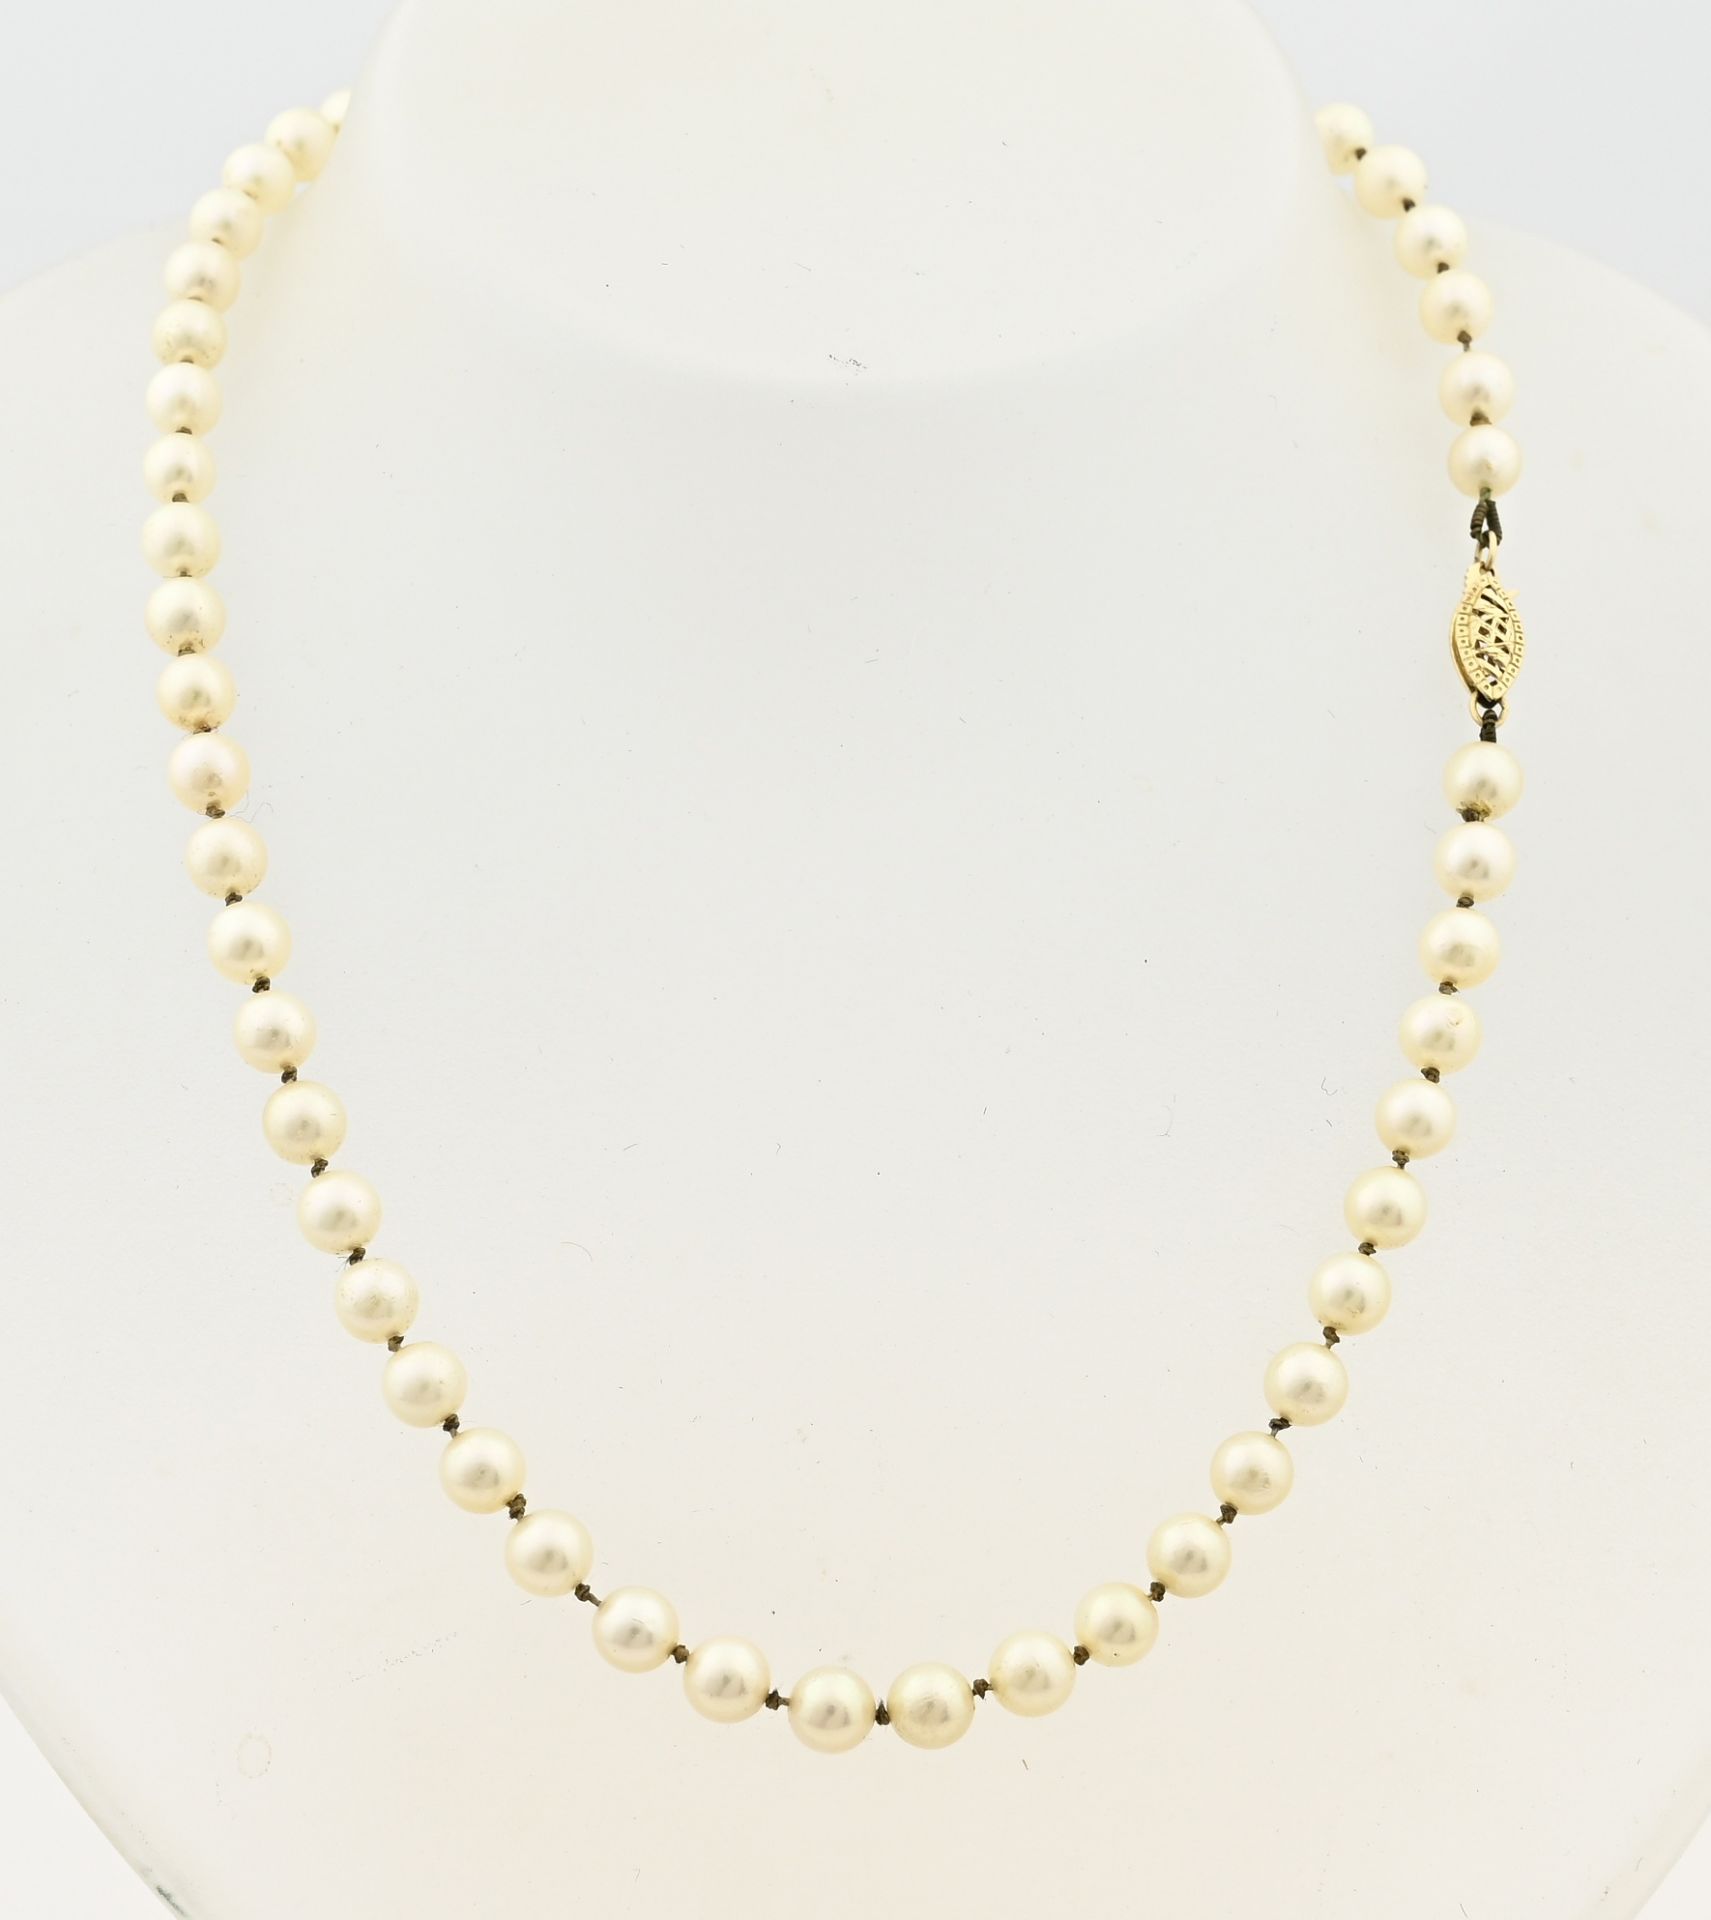 Necklace of cultured pearls with gold clasp